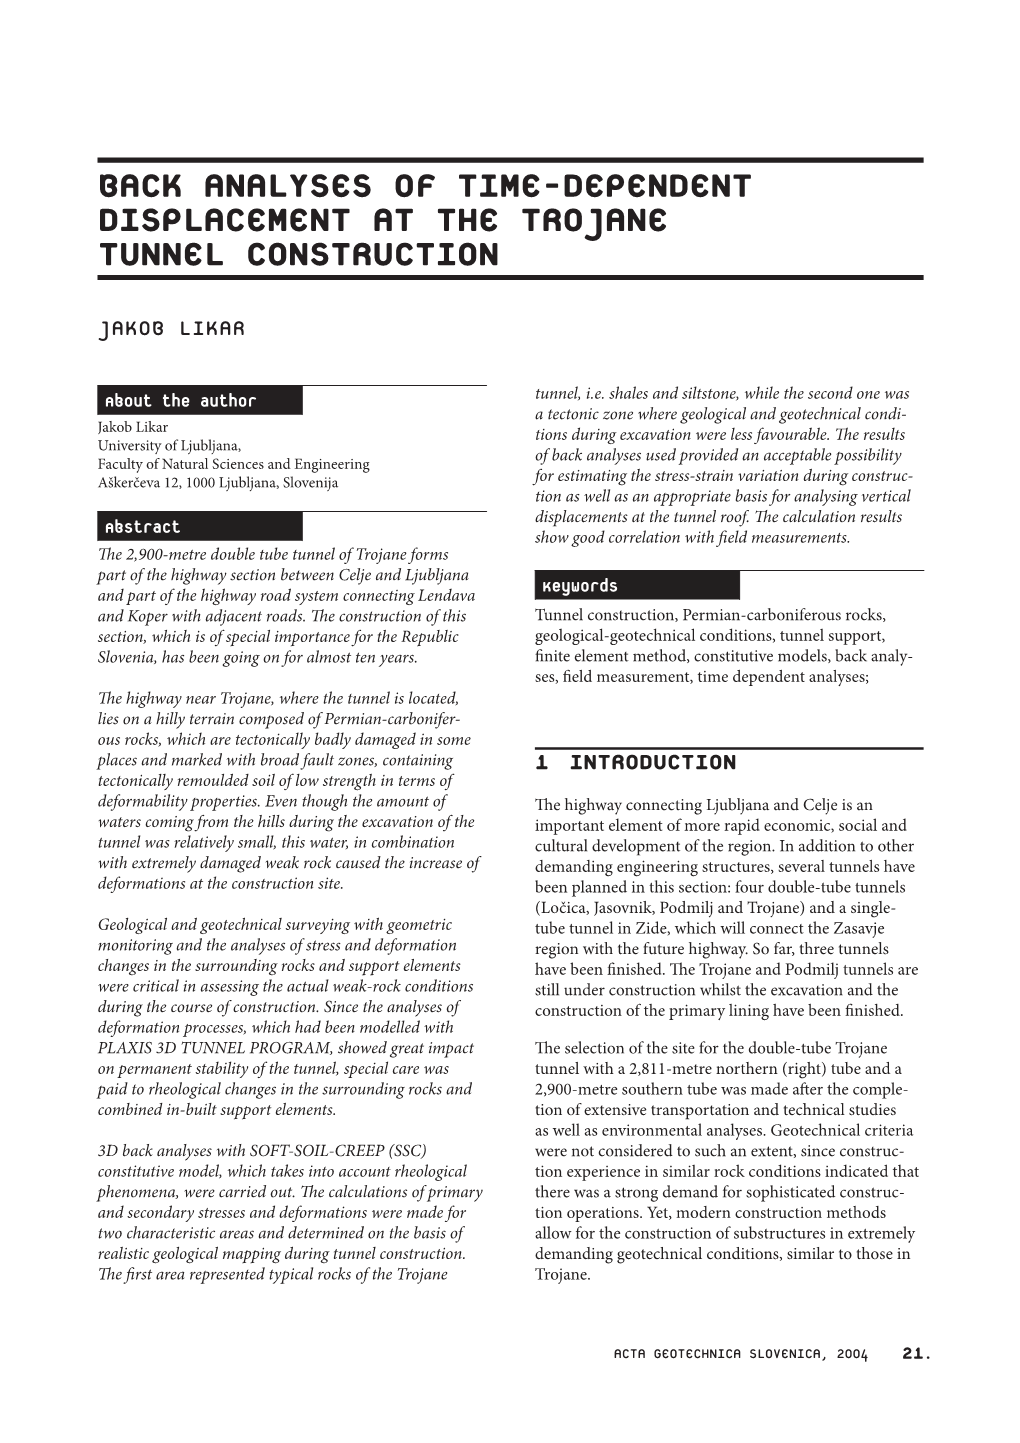 Back Analyses of Time-Dependent Displacement at the Trojane Tunnel Construction